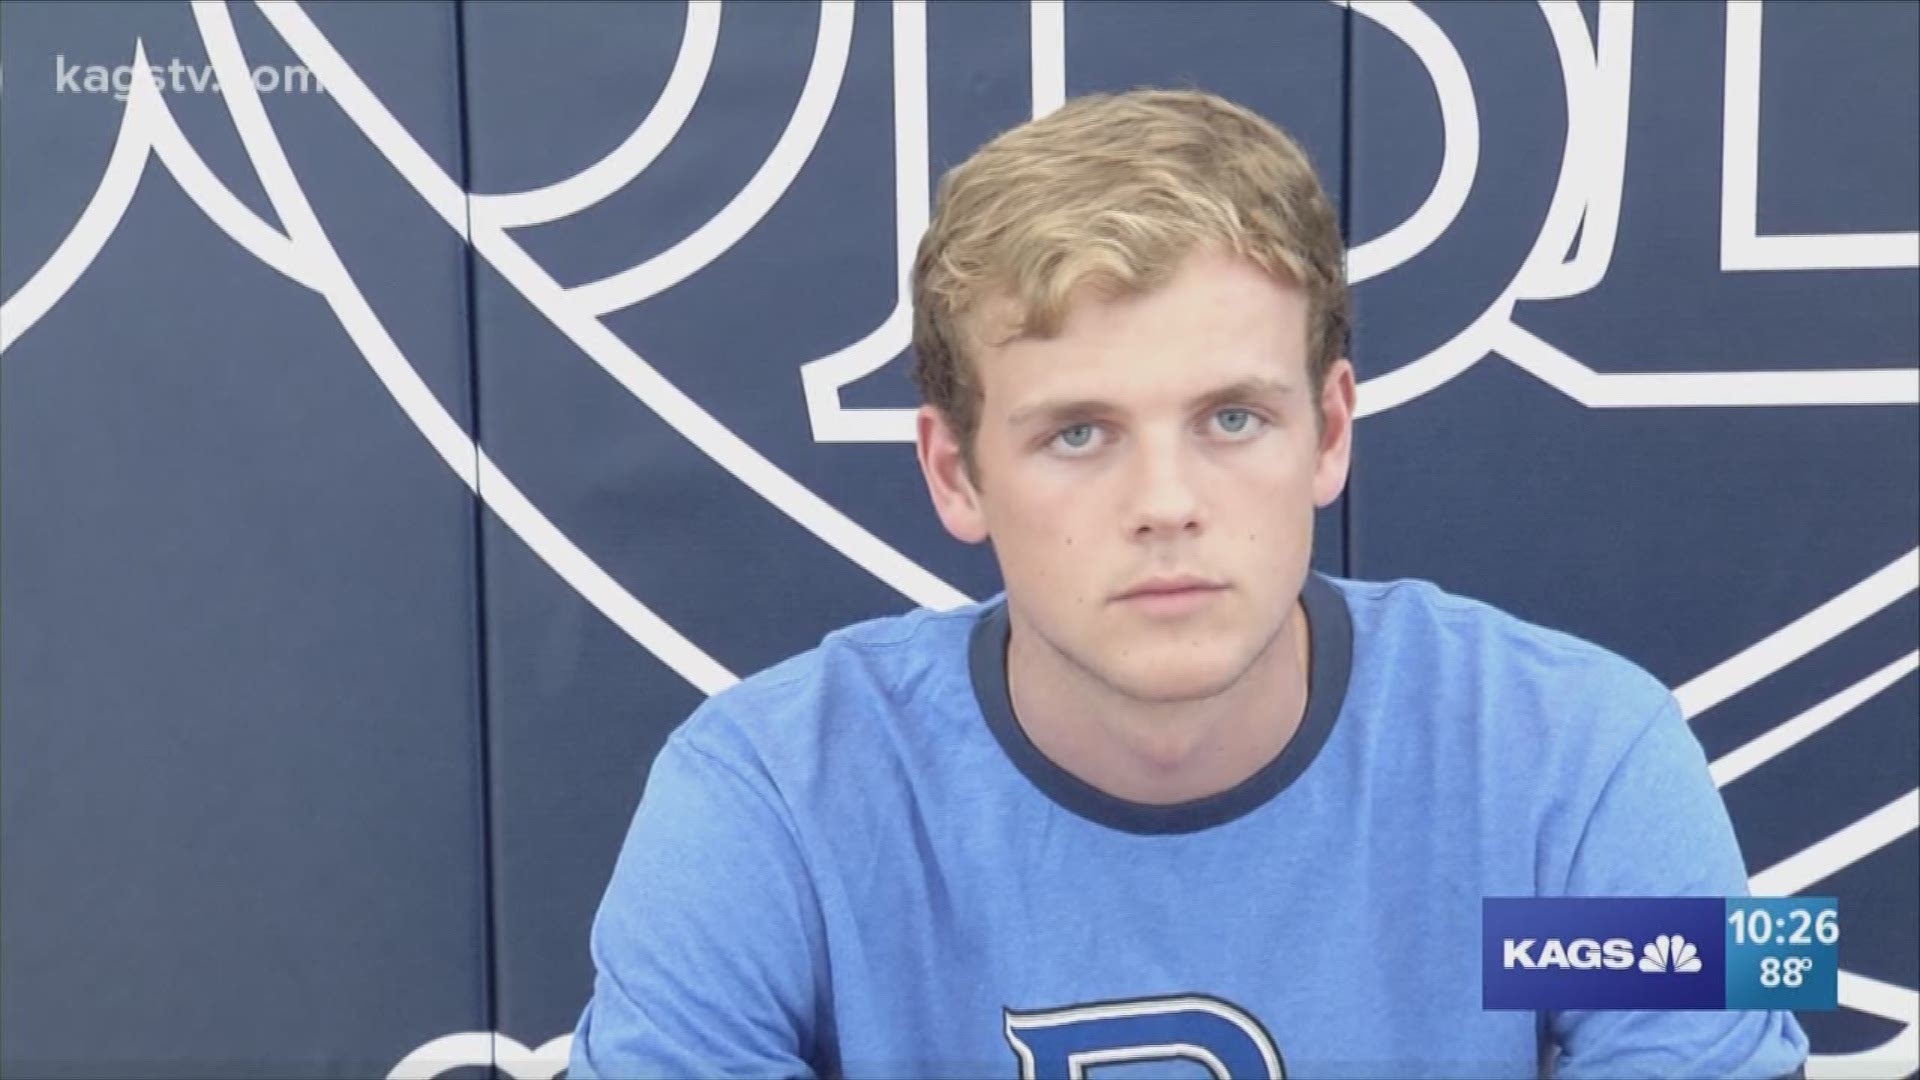 A high school student from Flower Mound became the first signee for the new Blinn men's soccer program.